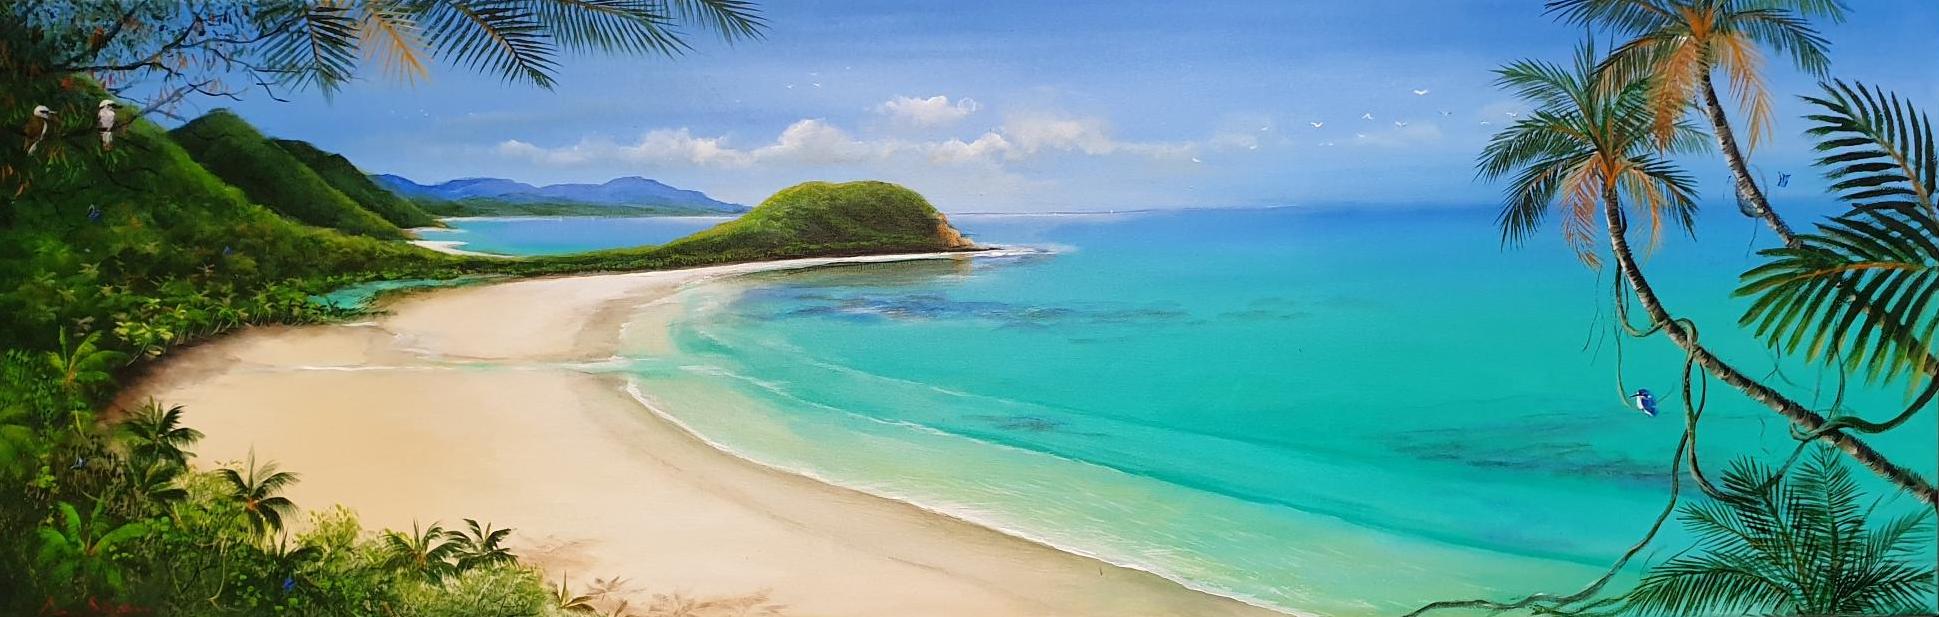 Ian Stephens - Coconut Beach in Cape Tribulation, part of the tropical Far North Queensland, Located in the World Heritage Listed Daintree Rainforest.  Kookaburras sitting in a palm tree overlooking the sparkling torquise Coral Sea 